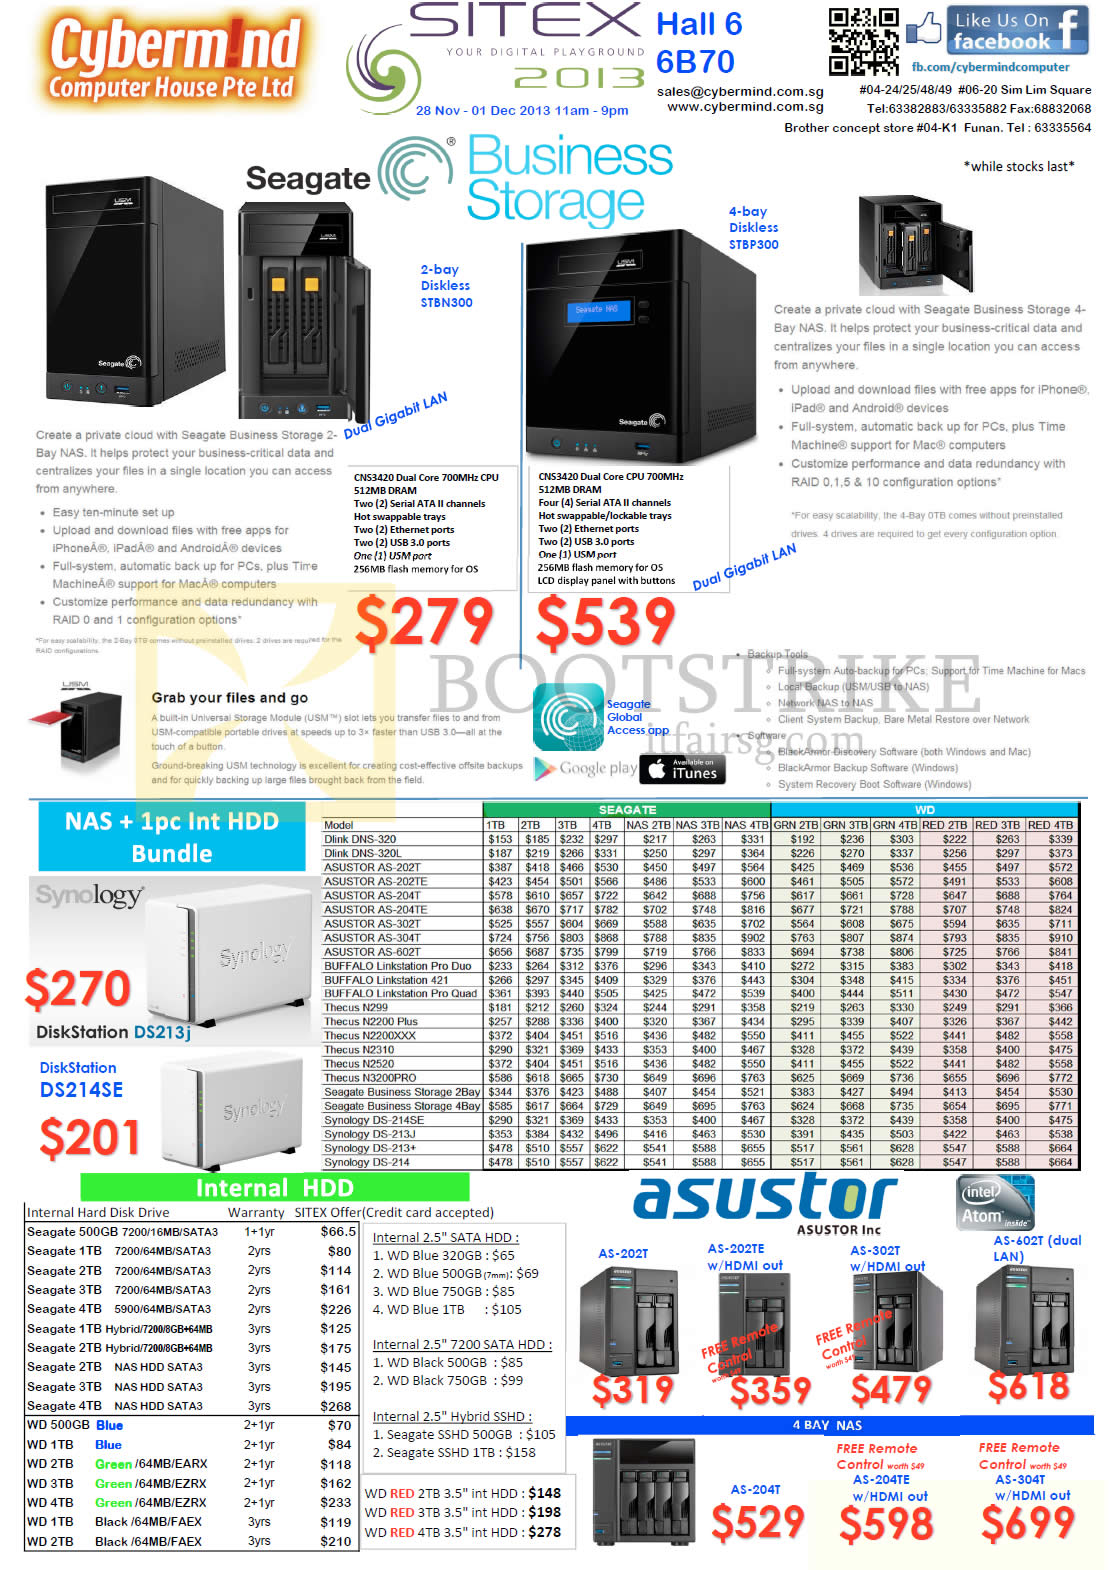 SITEX 2013 price list image brochure of Cybermind NAS Seagate Business Storage STBN300 STBP300, Synology DiskStation, Asustor, Buffalo LinkStation, Thecus, D-Link, Internal HDD Seagate WD Western Digital